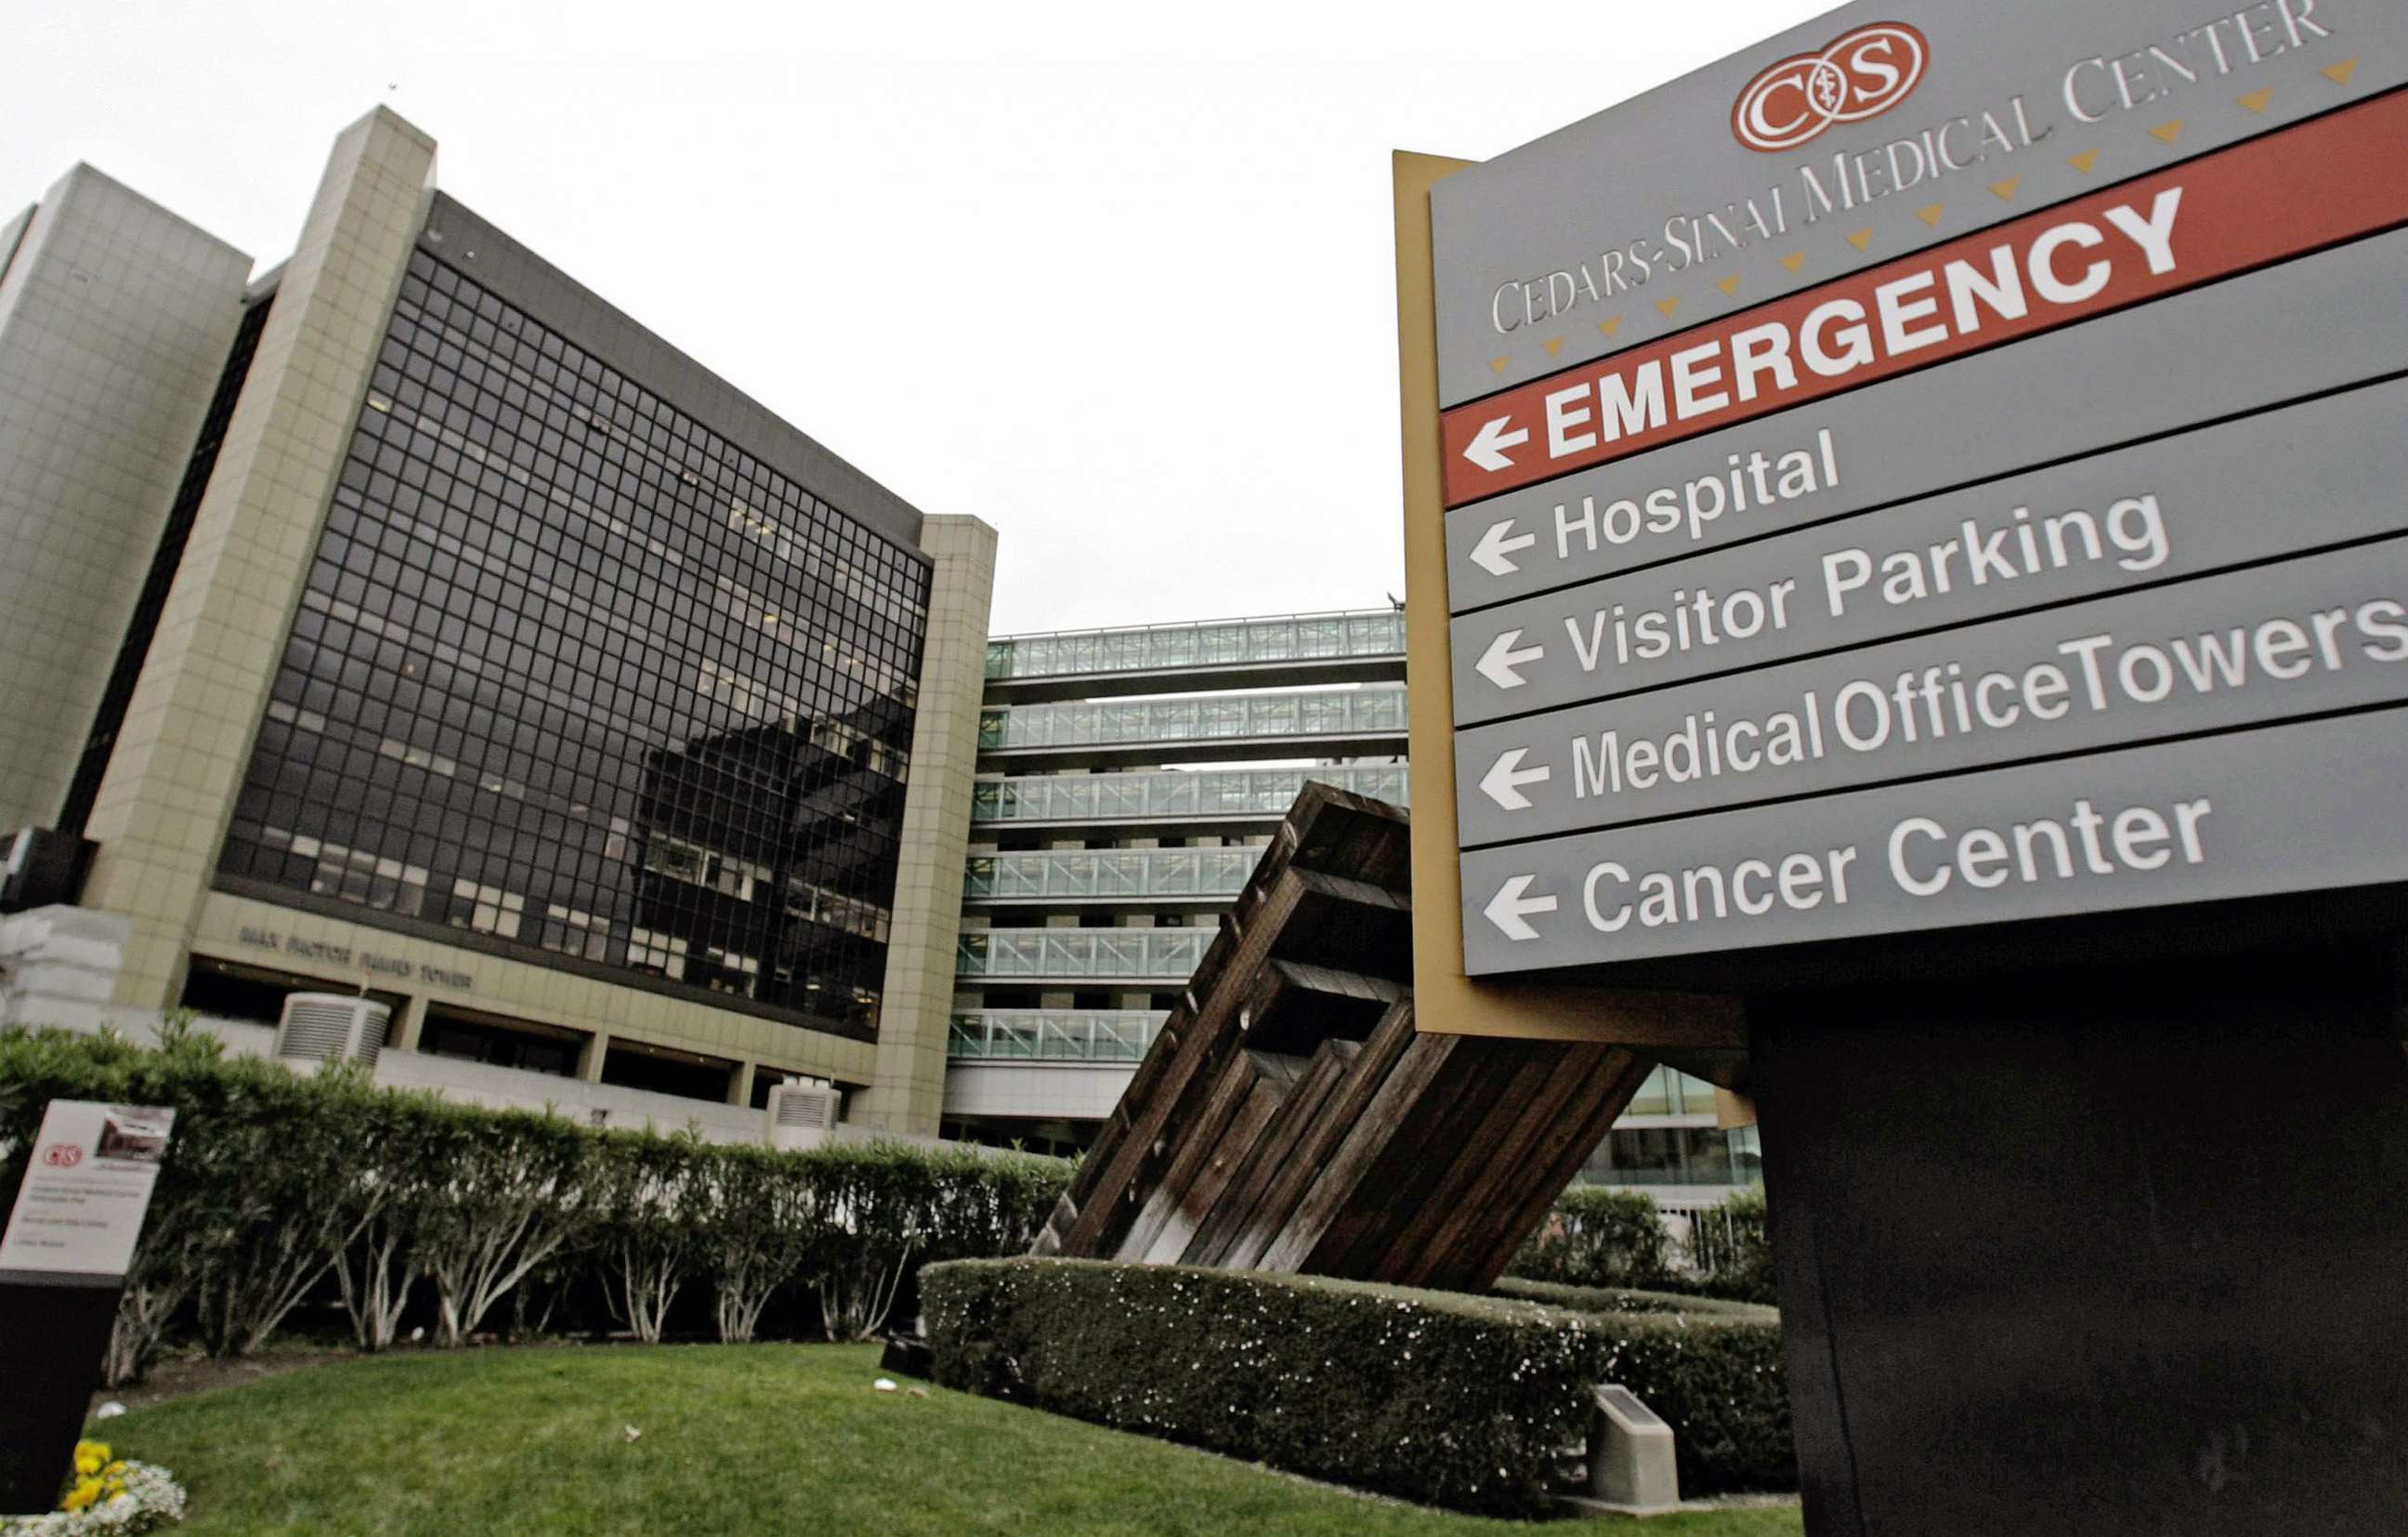 PHOTO: The exterior of Cedars-Sinai Medical Center in Los Angeles.